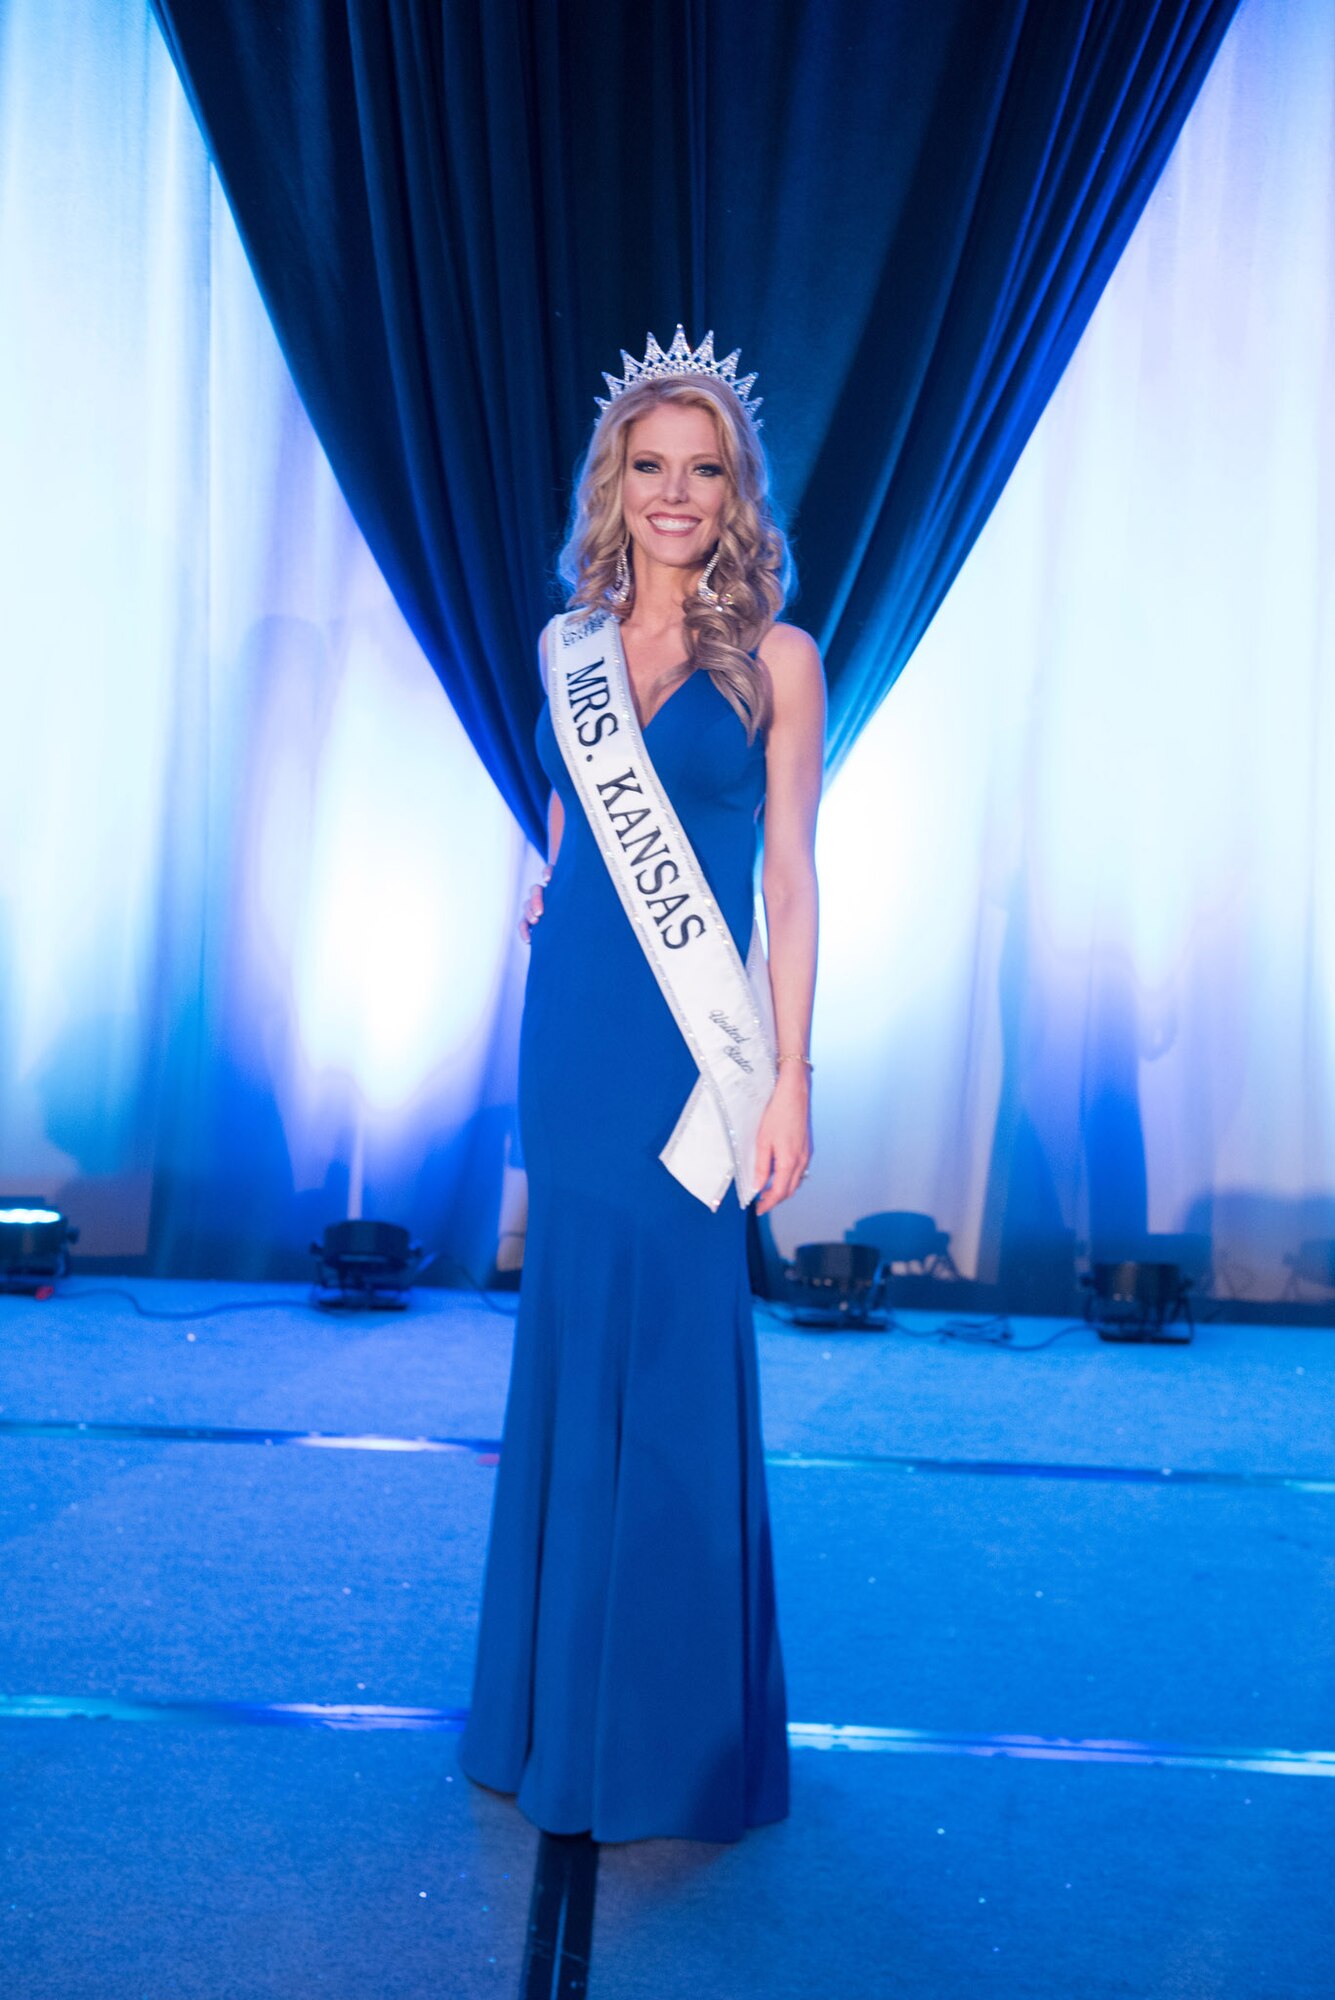 Riggs’ victory means she will go on to compete nationally for Mrs. United States.  The competition is slated for the first week of July in Orlando, Fla.